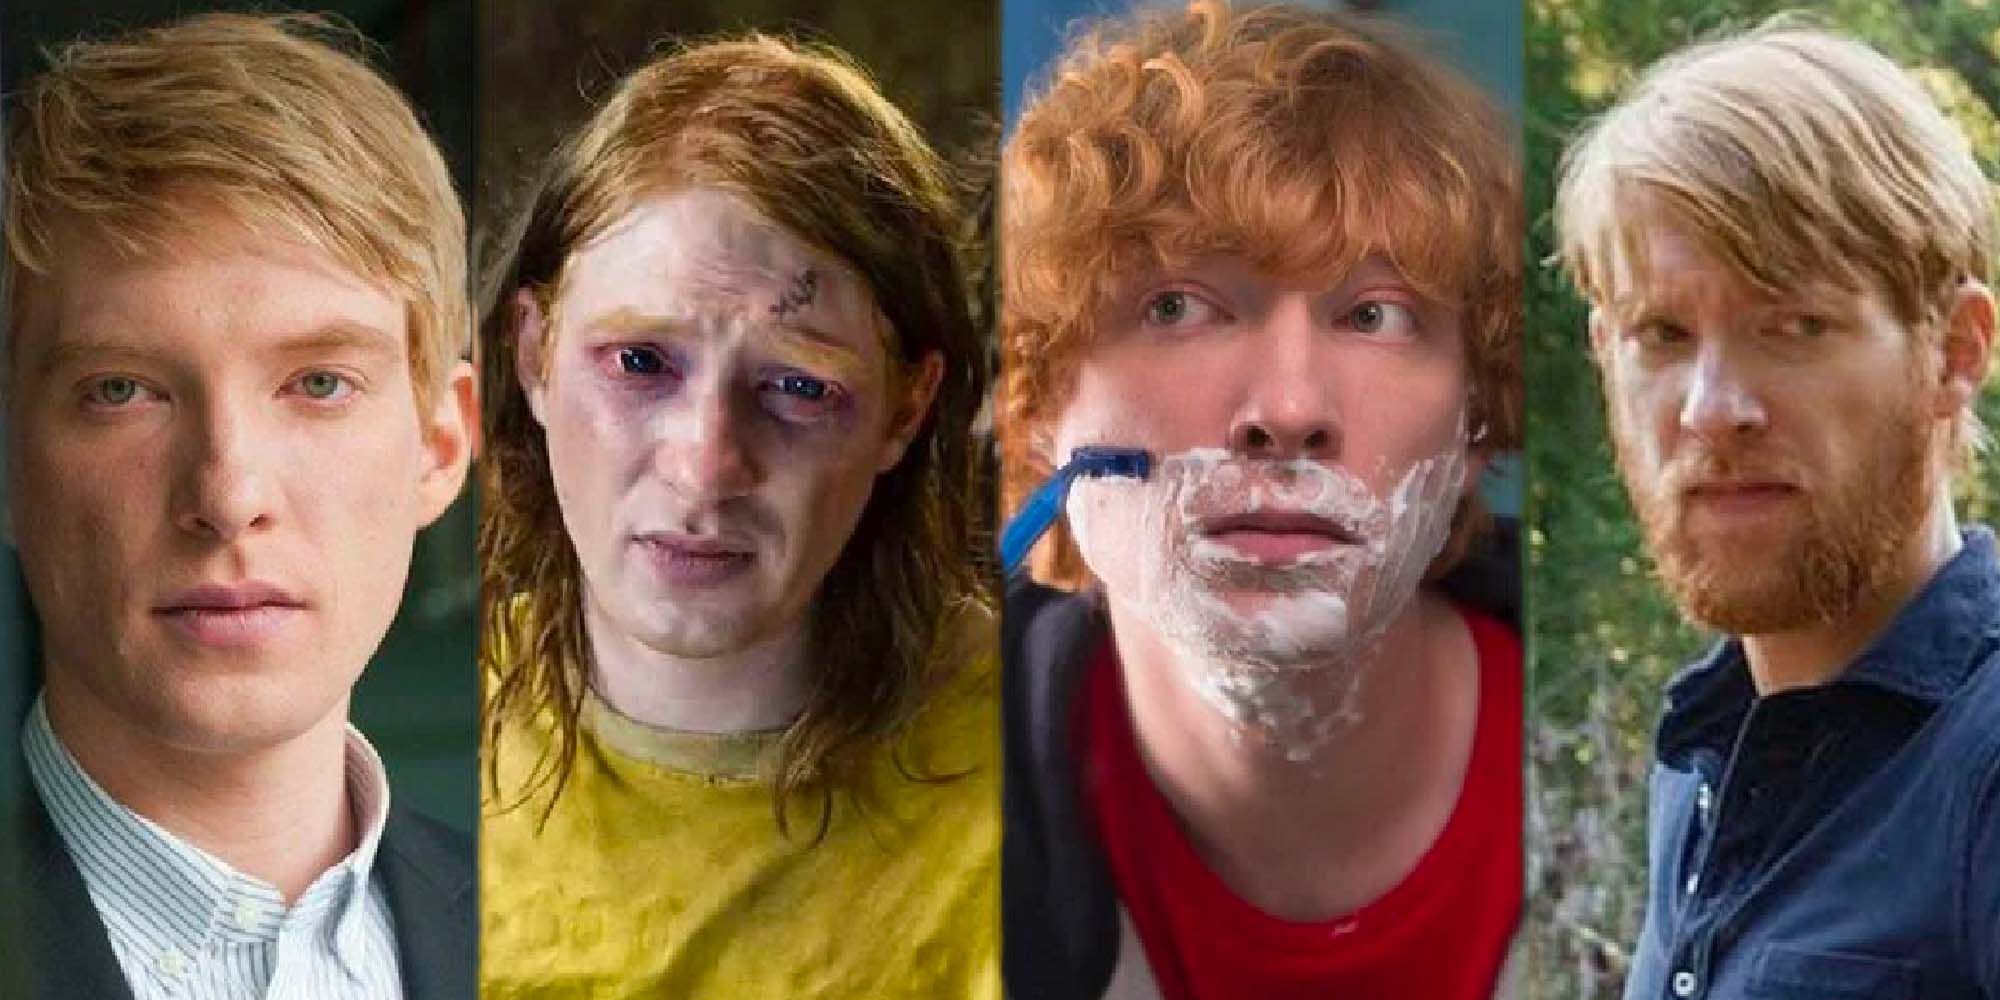 15 Best Domhnall Gleeson Movie Roles That Arent Star Wars (According To Rotten Tomatoes)